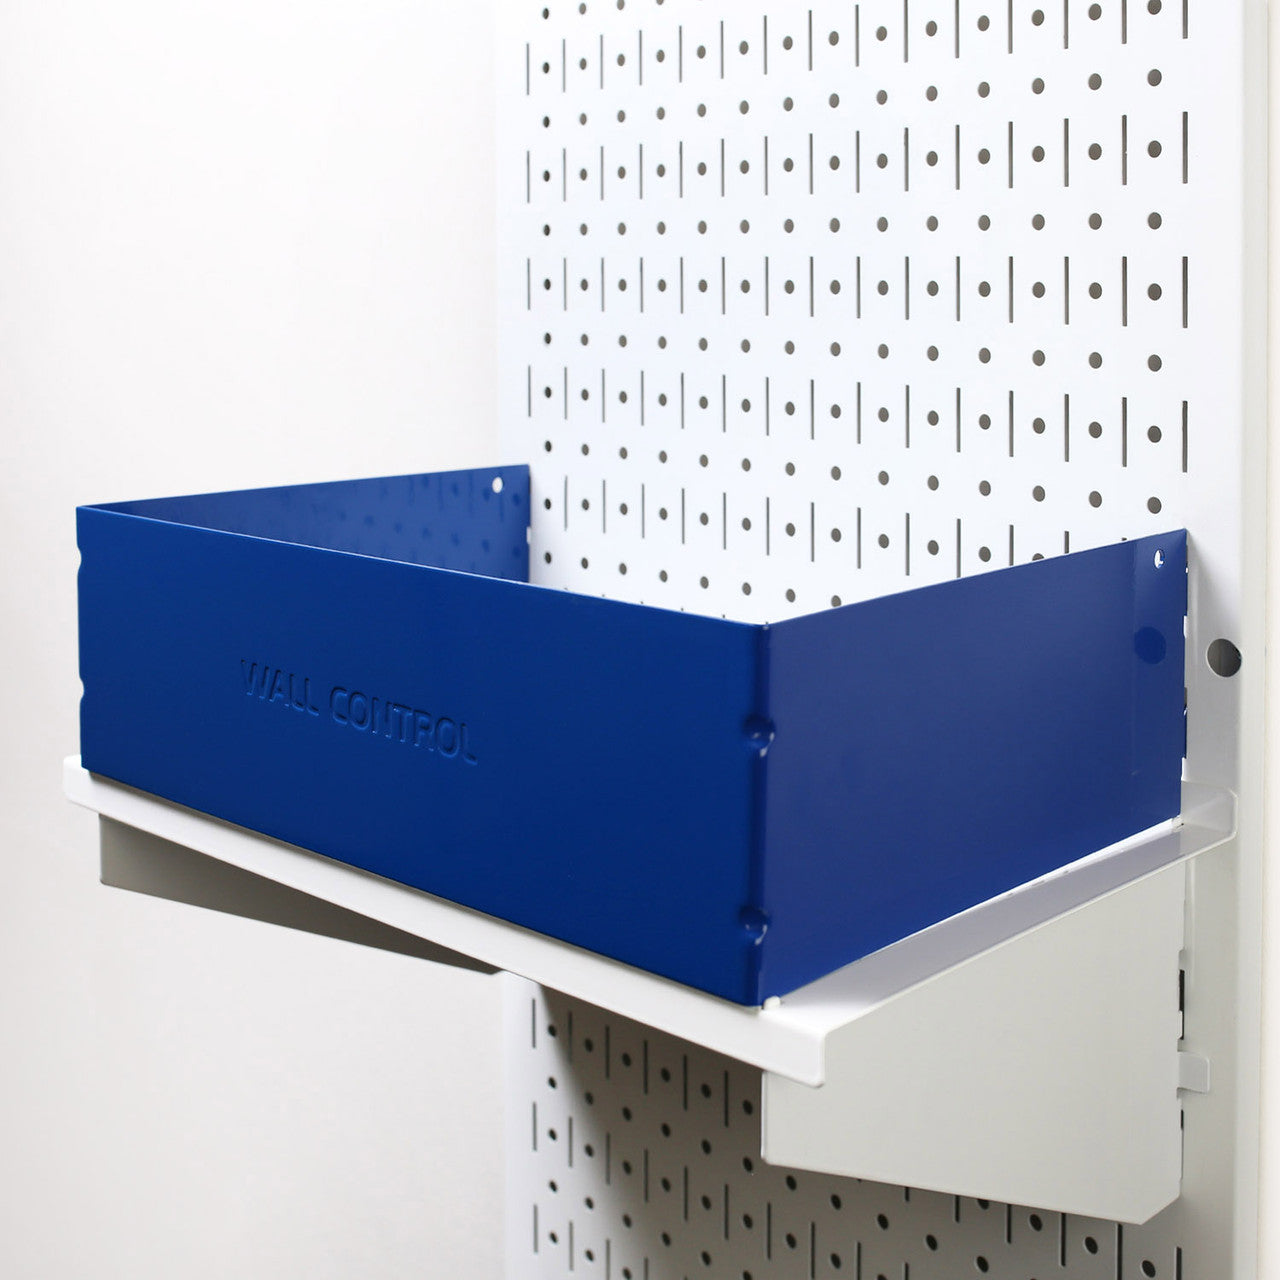 Gym Pegboard Shelf Guard and Wall Containment Stabilizing Bracket